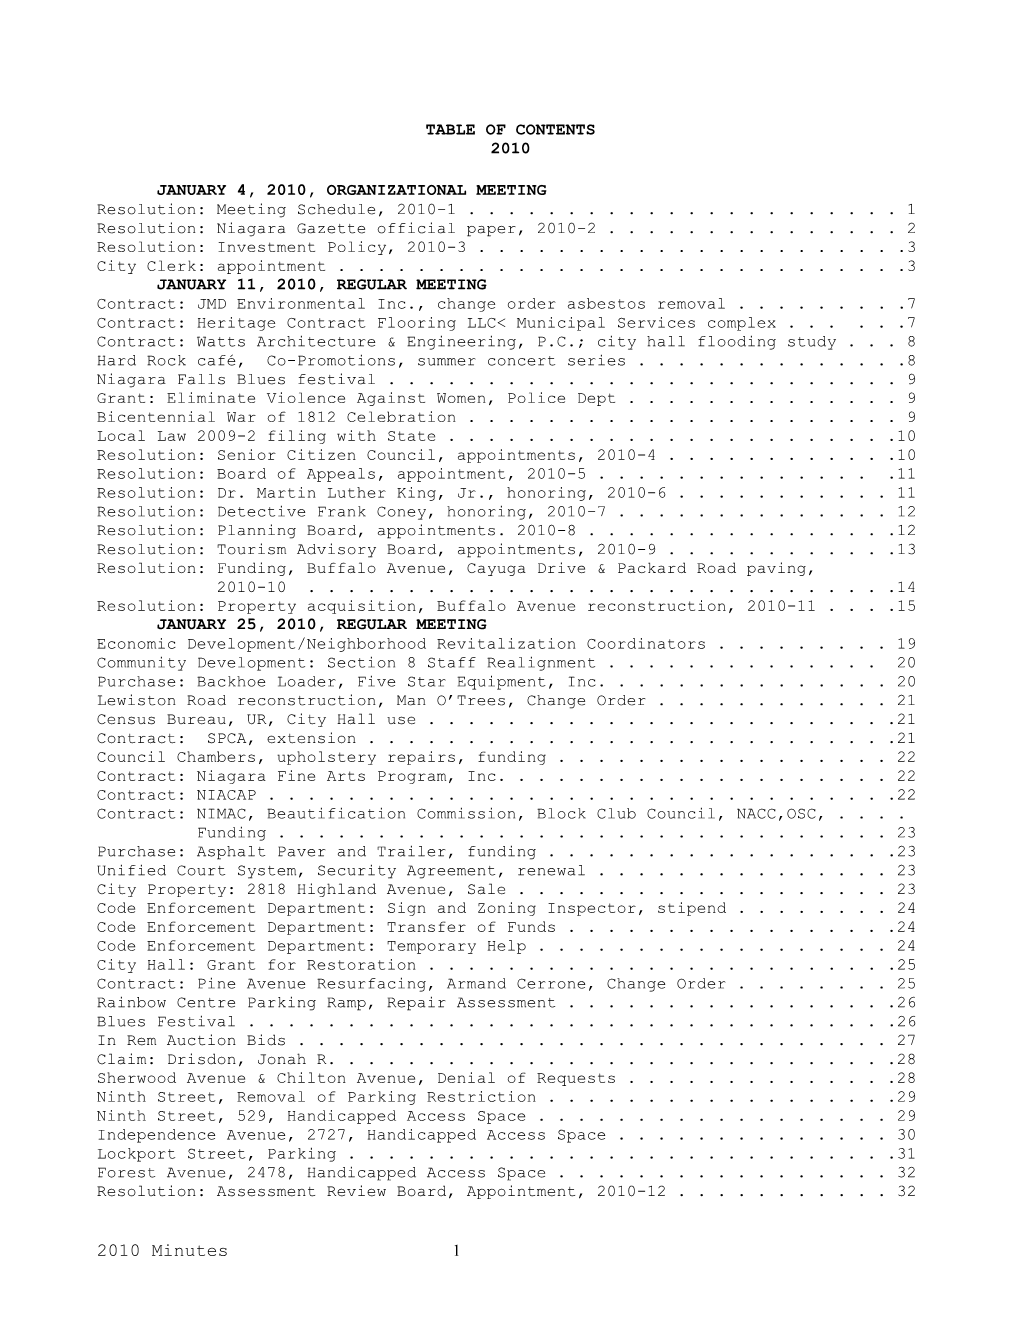 Table of Contents 2010